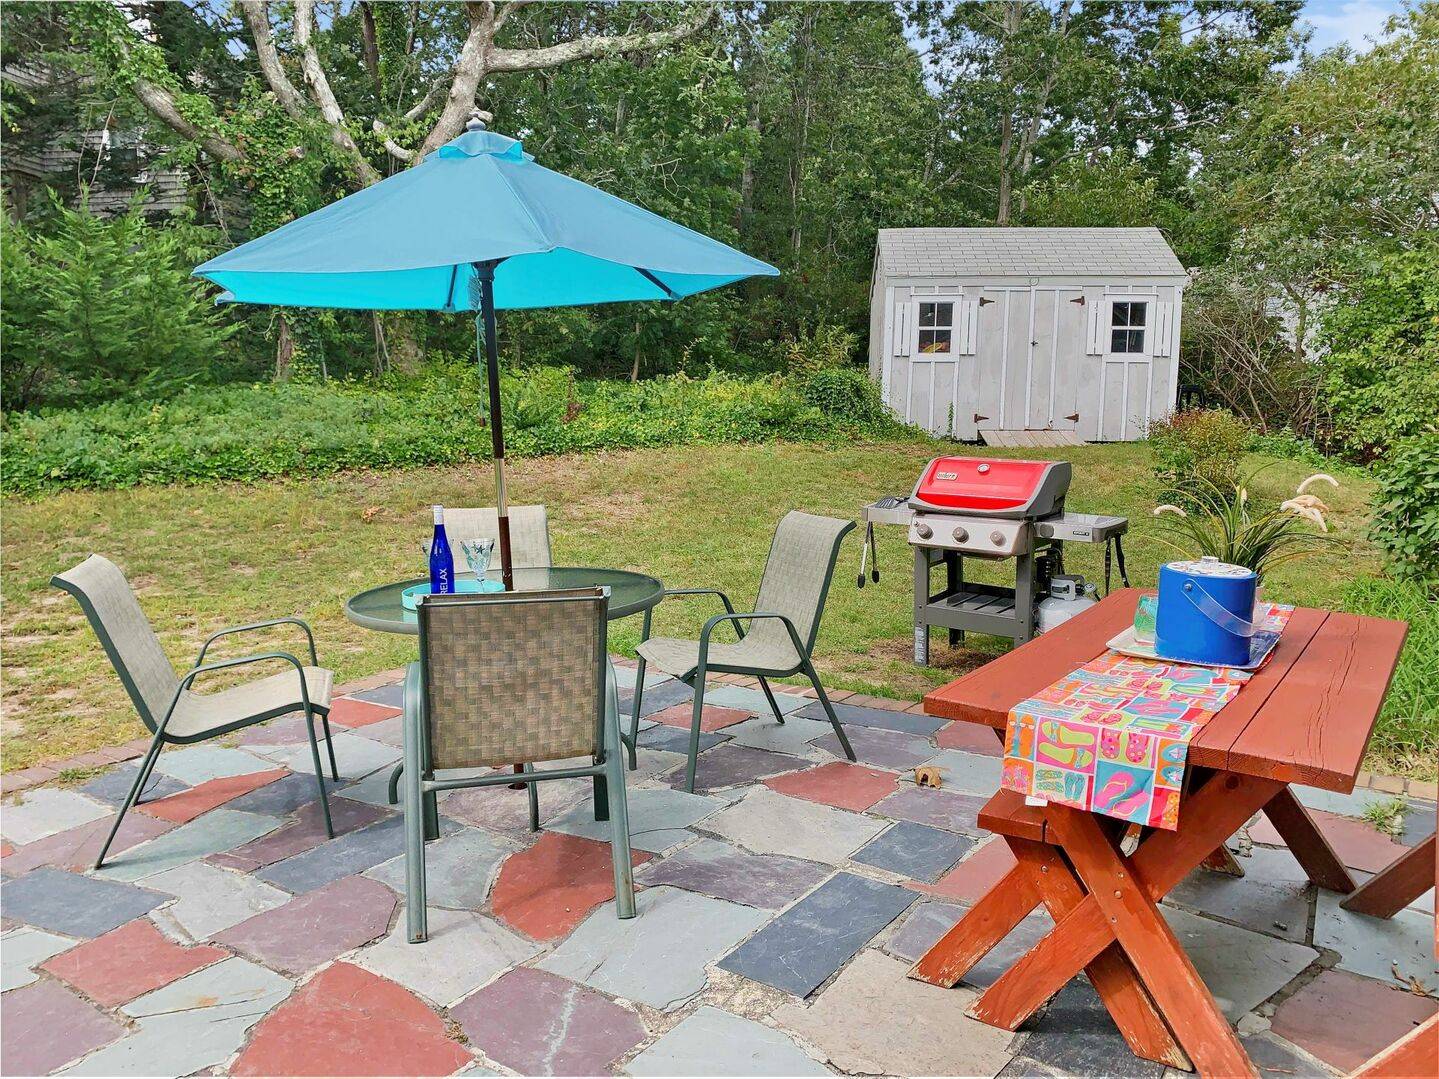 South Harwich Vacation Rental